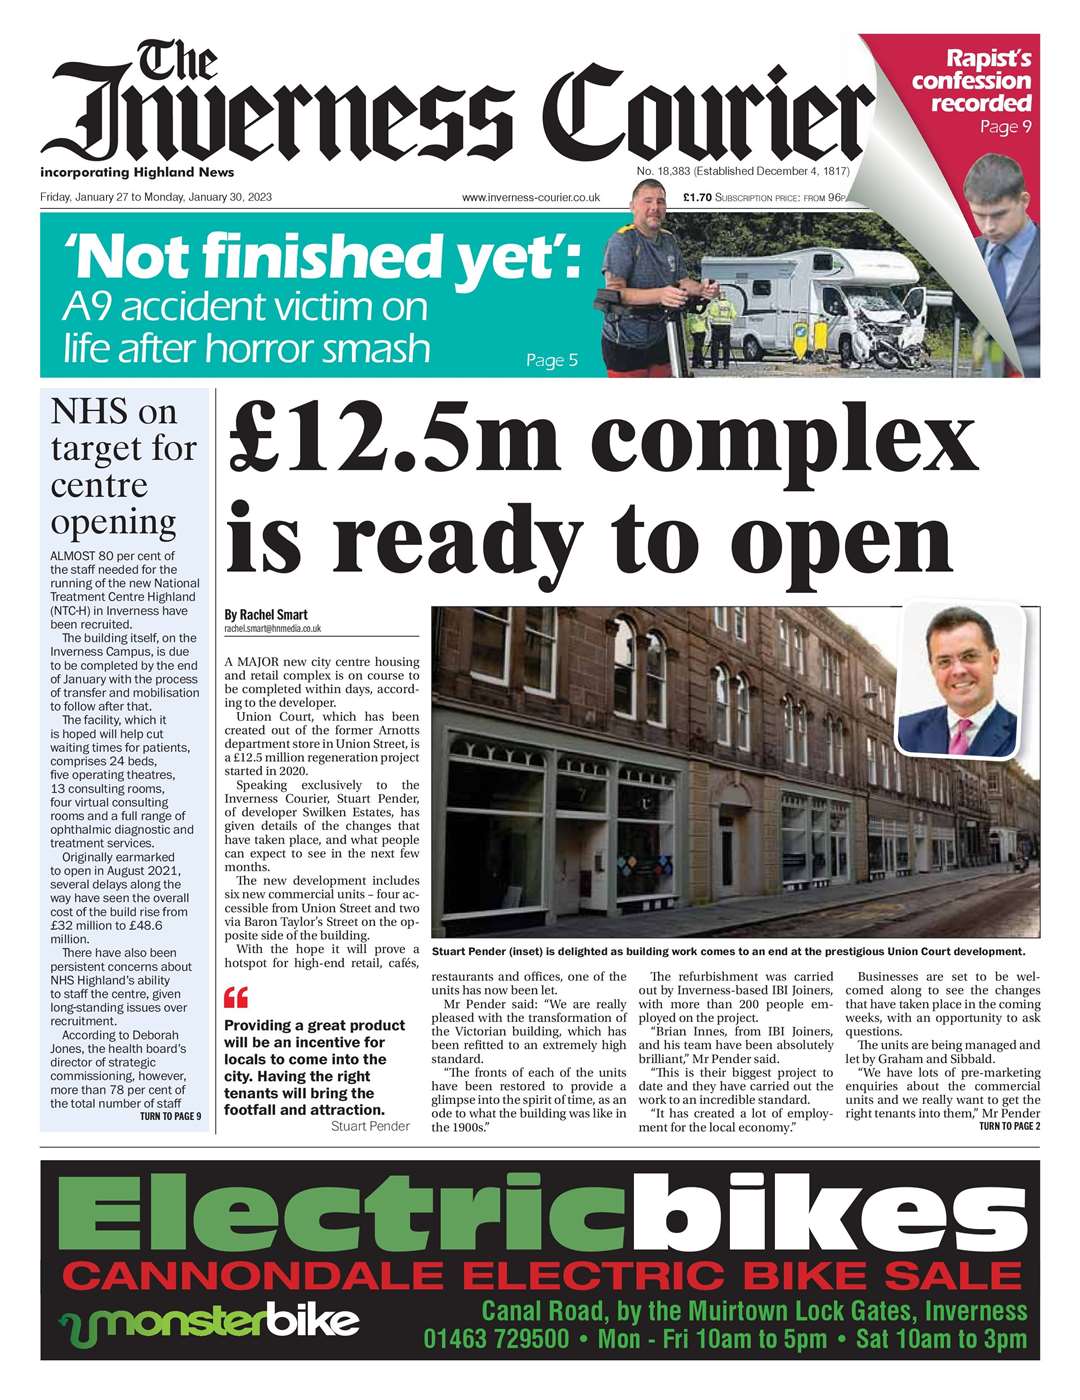 The Inverness Courier, January 27, front page.